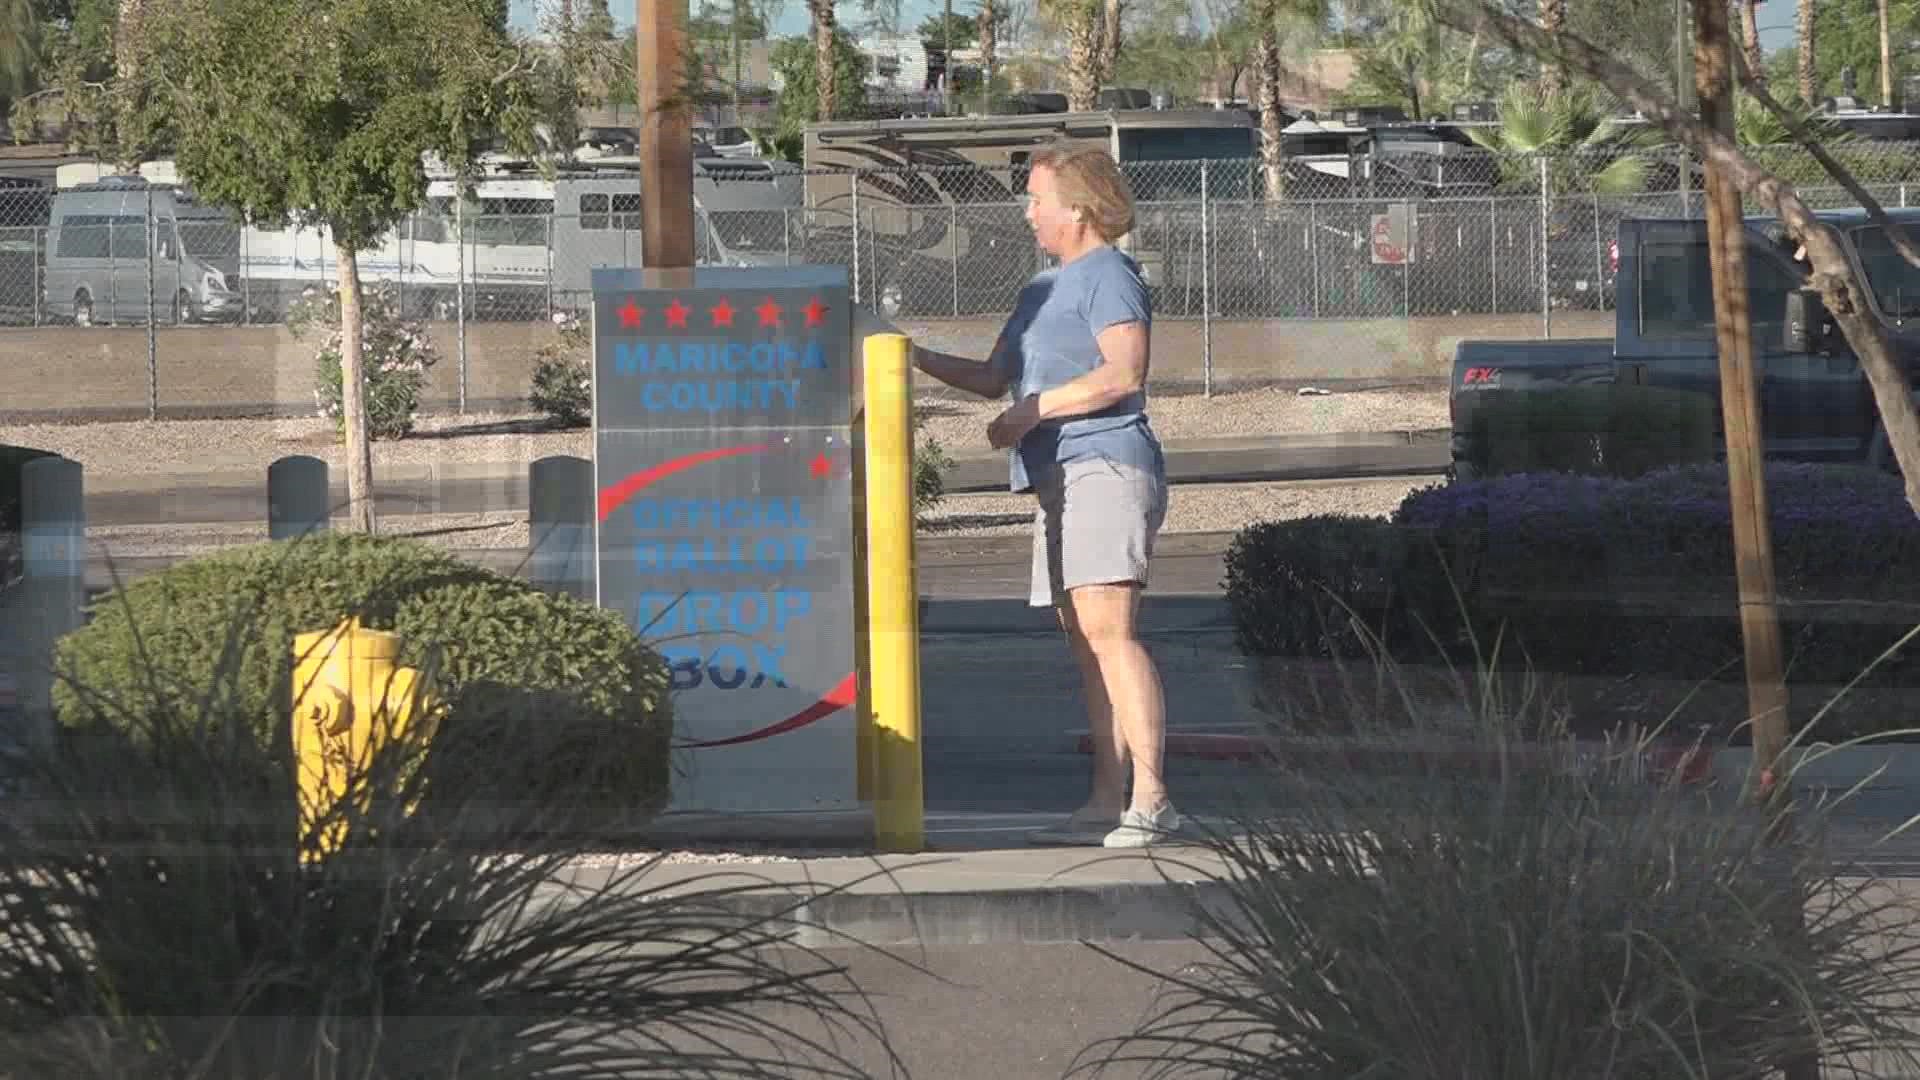 A federal judge issued an order Tuesday warning people who have been monitoring Arizona's drop-off boxes not to follow voters as they deposit their ballots.